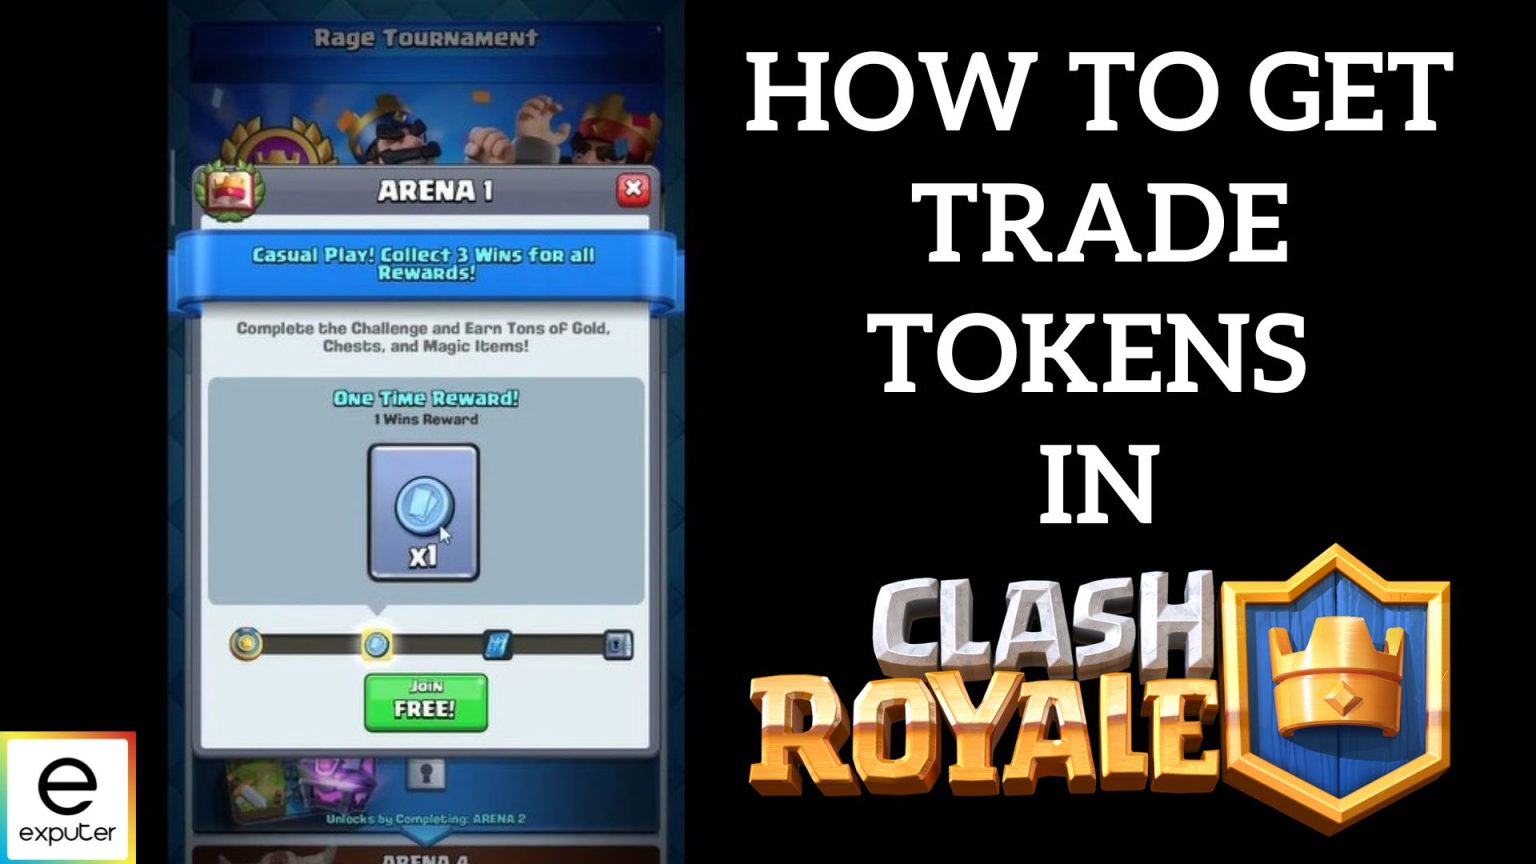 How To Get Trade Tokens In Clash Royale [Explained]